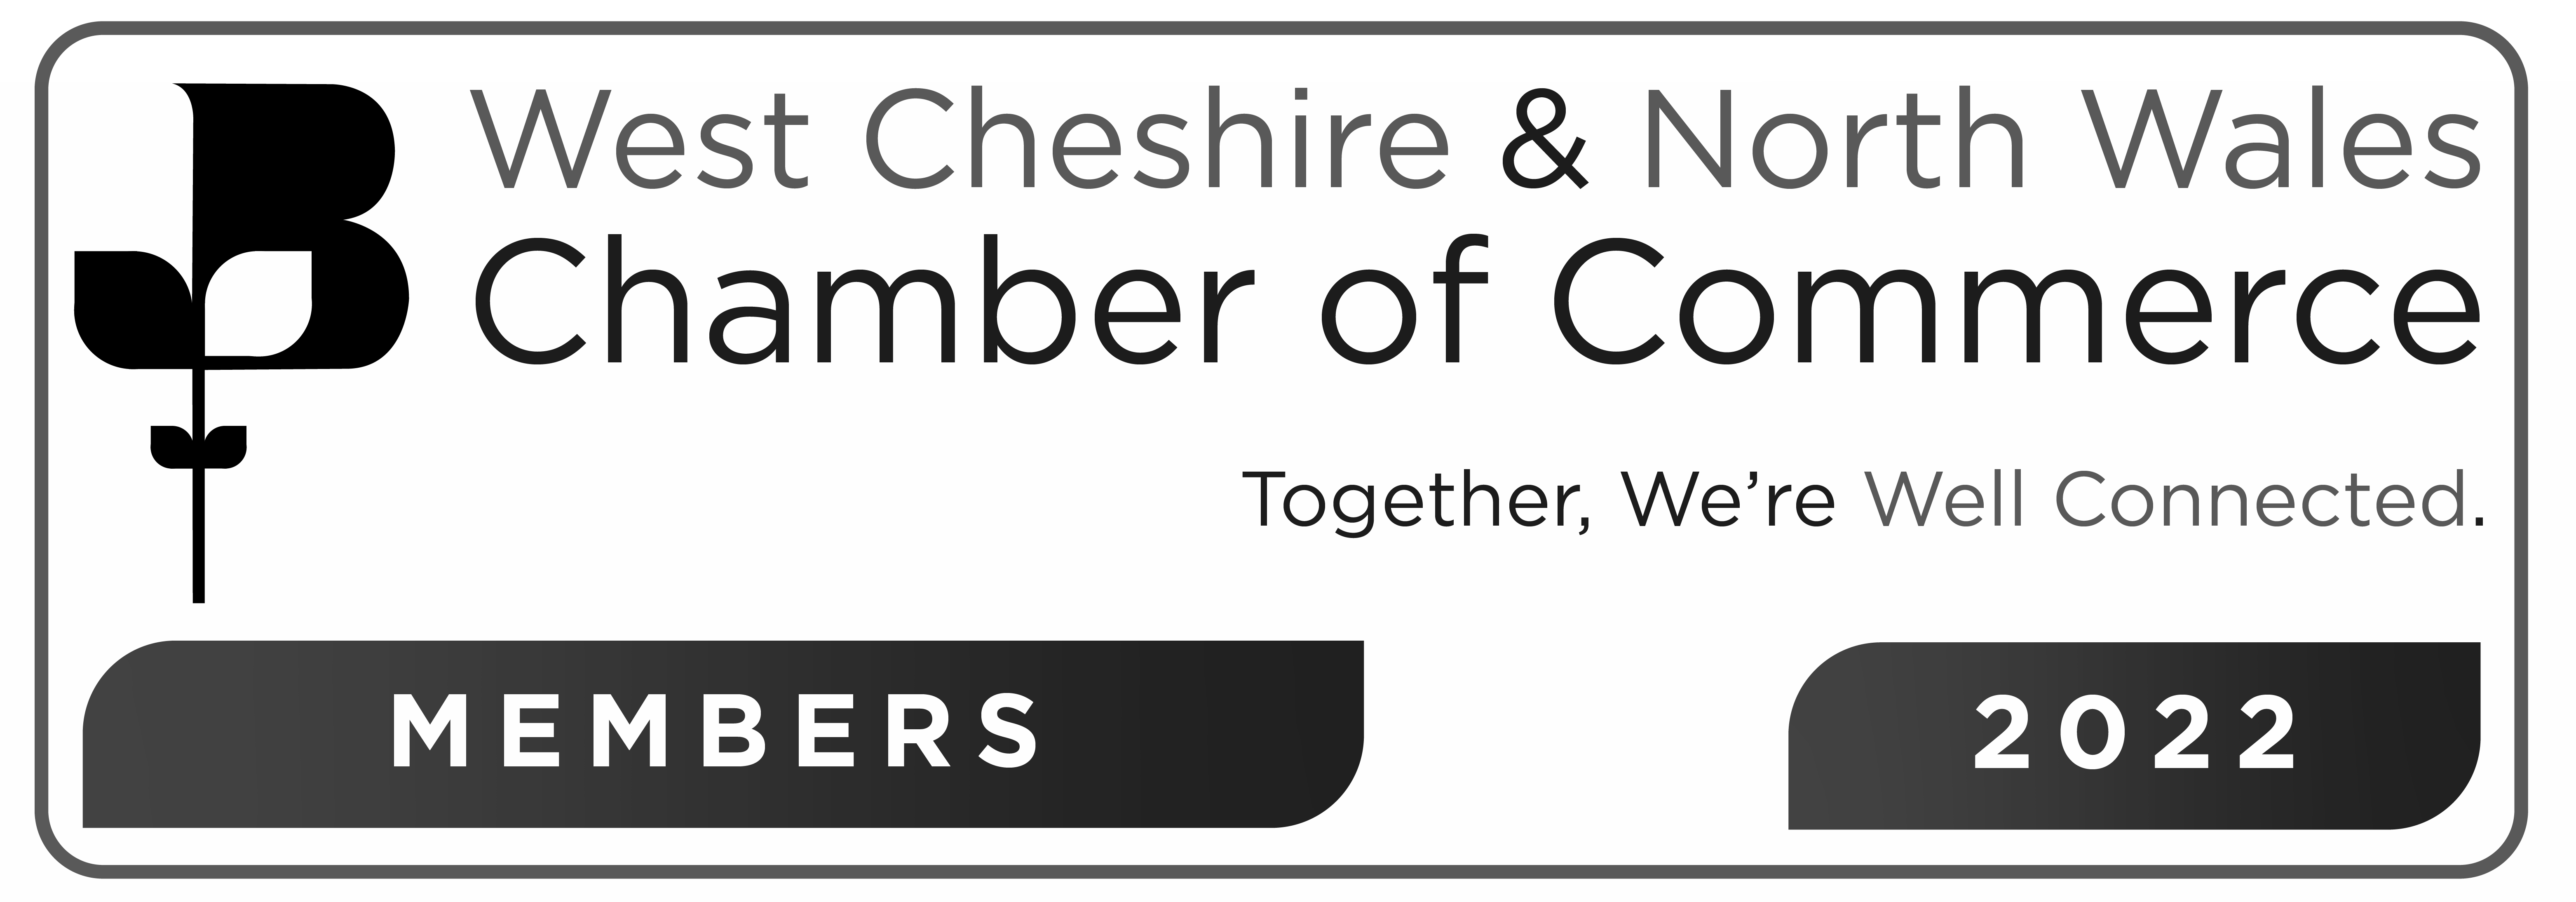 https://thecheshiregarden.co.uk/wp-content/uploads/Chamber-logo_Grey-Scale.png